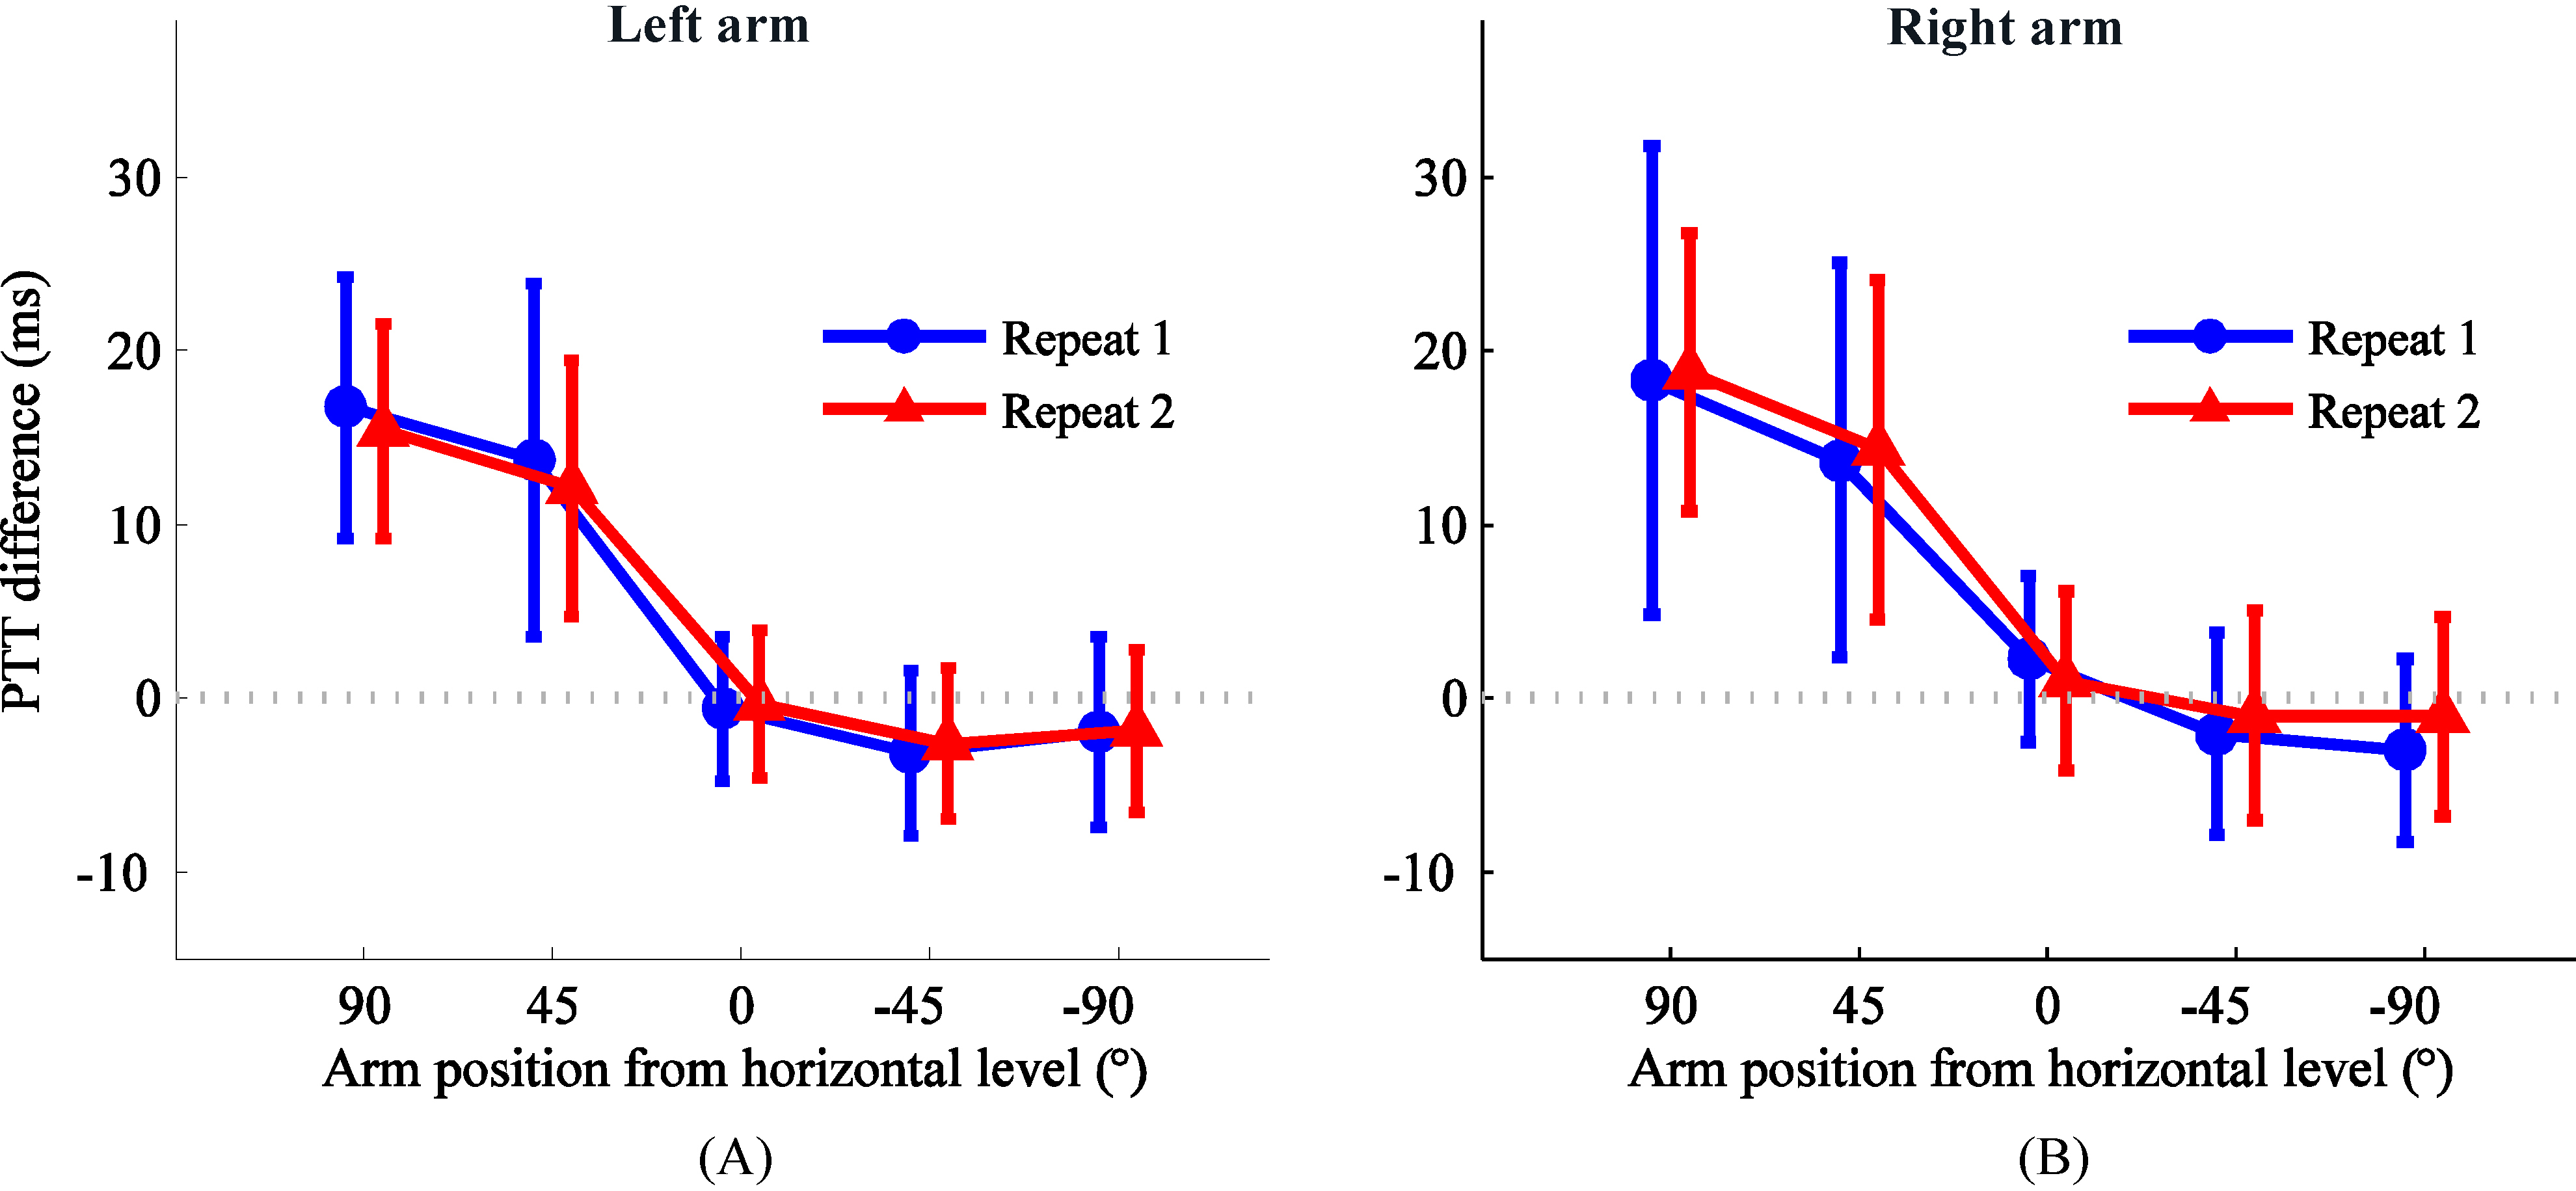 Means and SDs of the PTT change between one arm at different positions (90∘, 45∘, 0∘, -45∘, and -90∘ to the horizontal level) and the other arm at the horizontal level as the reference. (A) PTT change for left arm (right arm at the horizontal level as reference) and (B) PTT change for right arm (left arm at the horizontal level as reference).